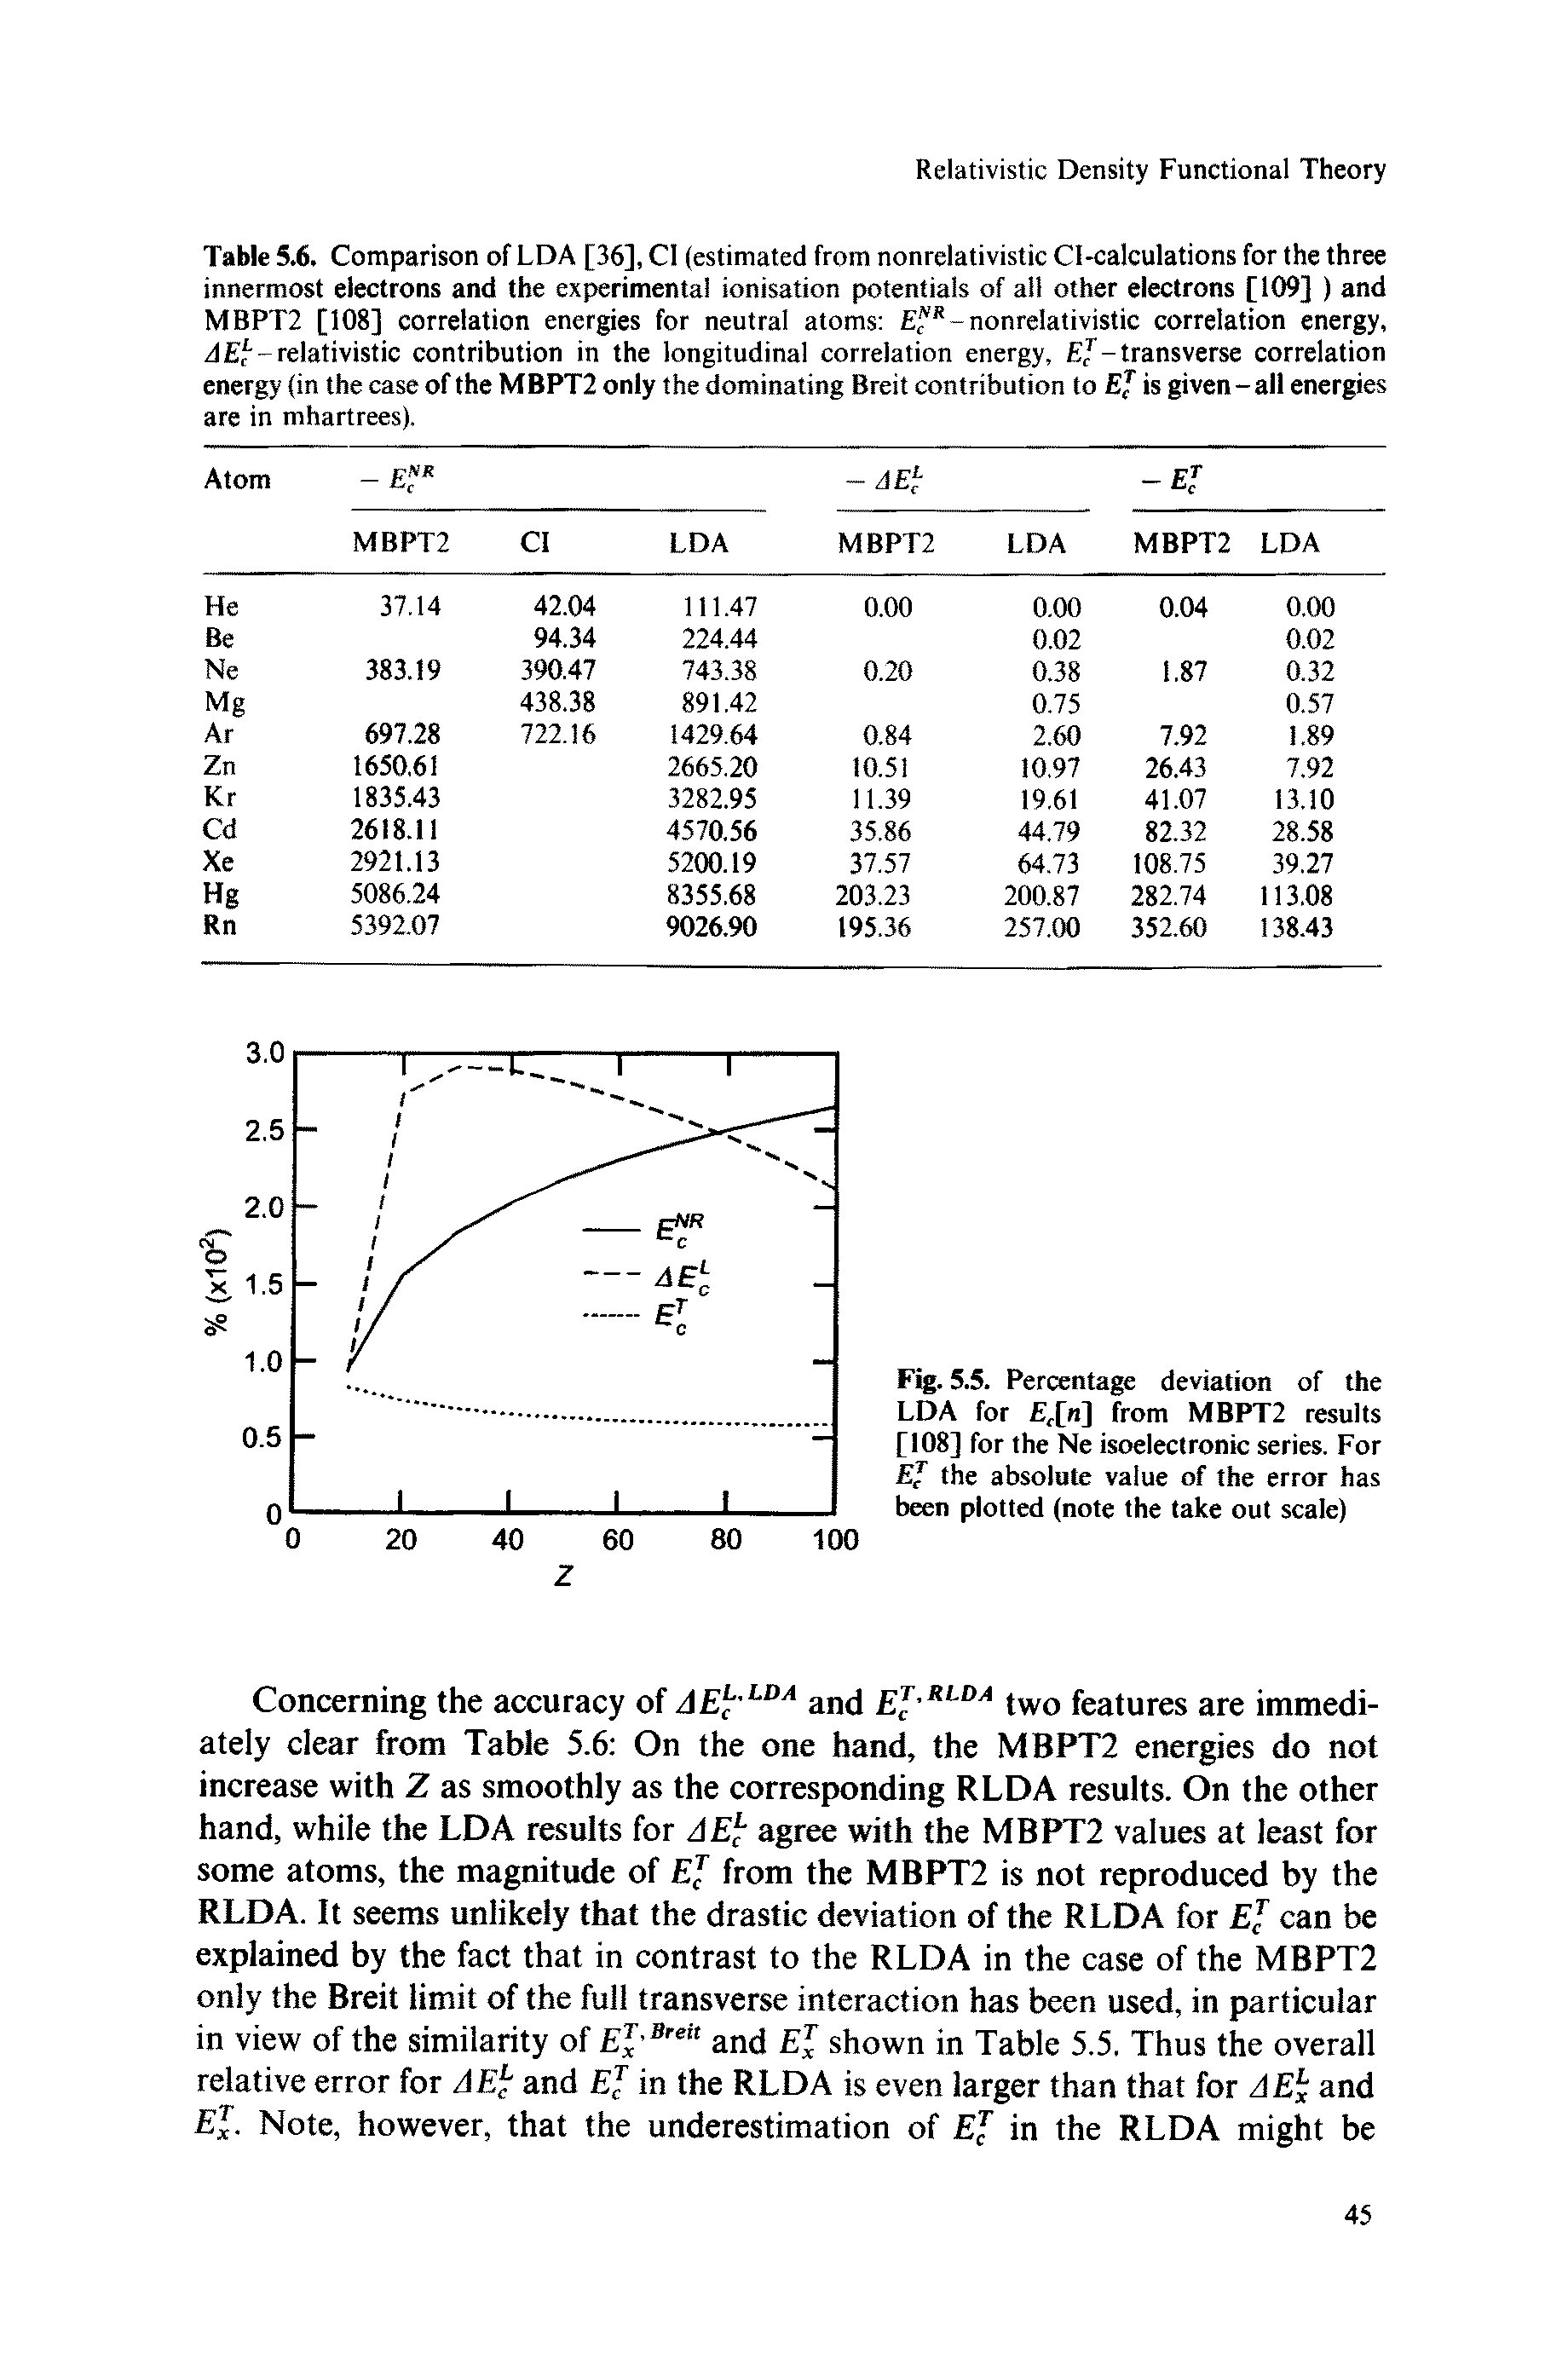 Fig. 5.5. Percentage deviation of the LDA for f[ ] from MBPT2 results [108] for the Ne isoelectronic series. For Ej the absolute value of the error has been plotted (note the take out scale)...